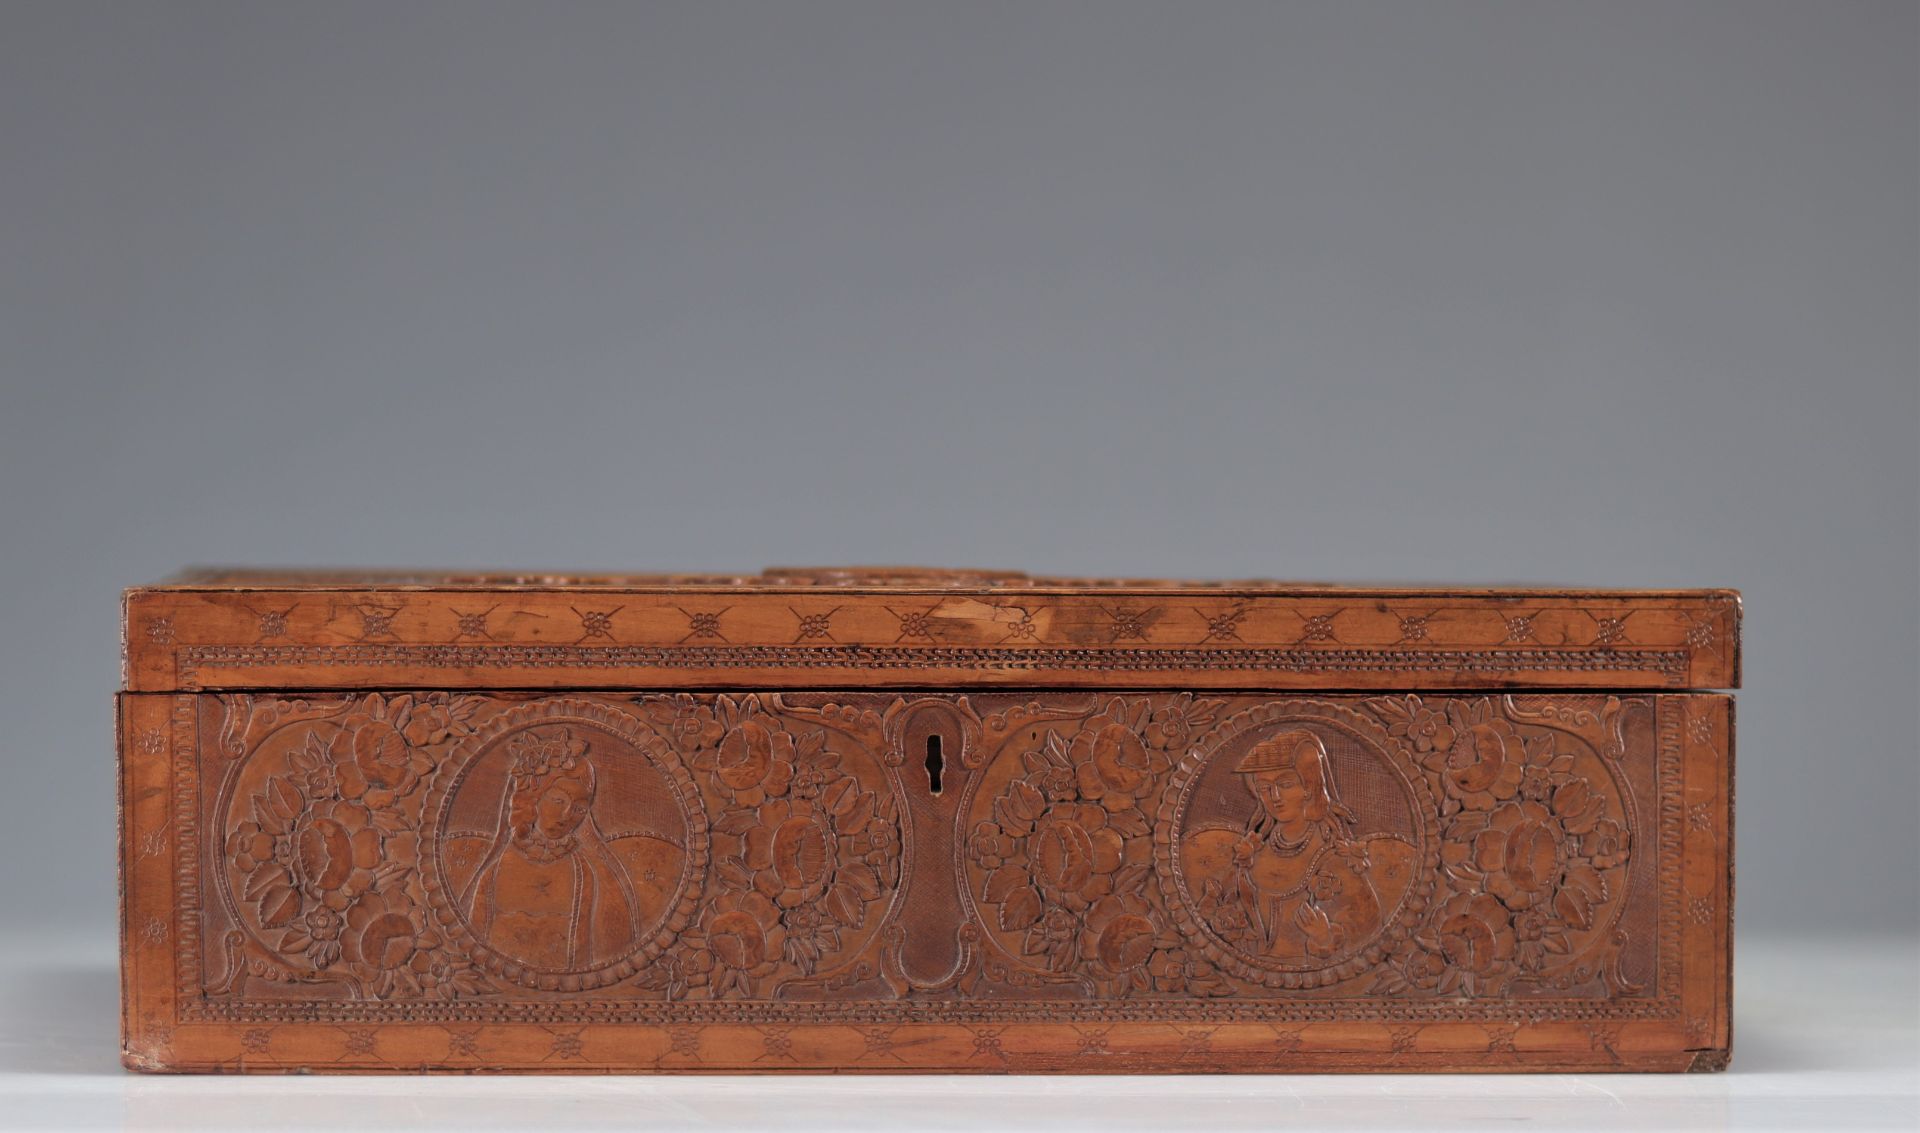 Grand Ottoman box in finely carved wood - Image 2 of 3